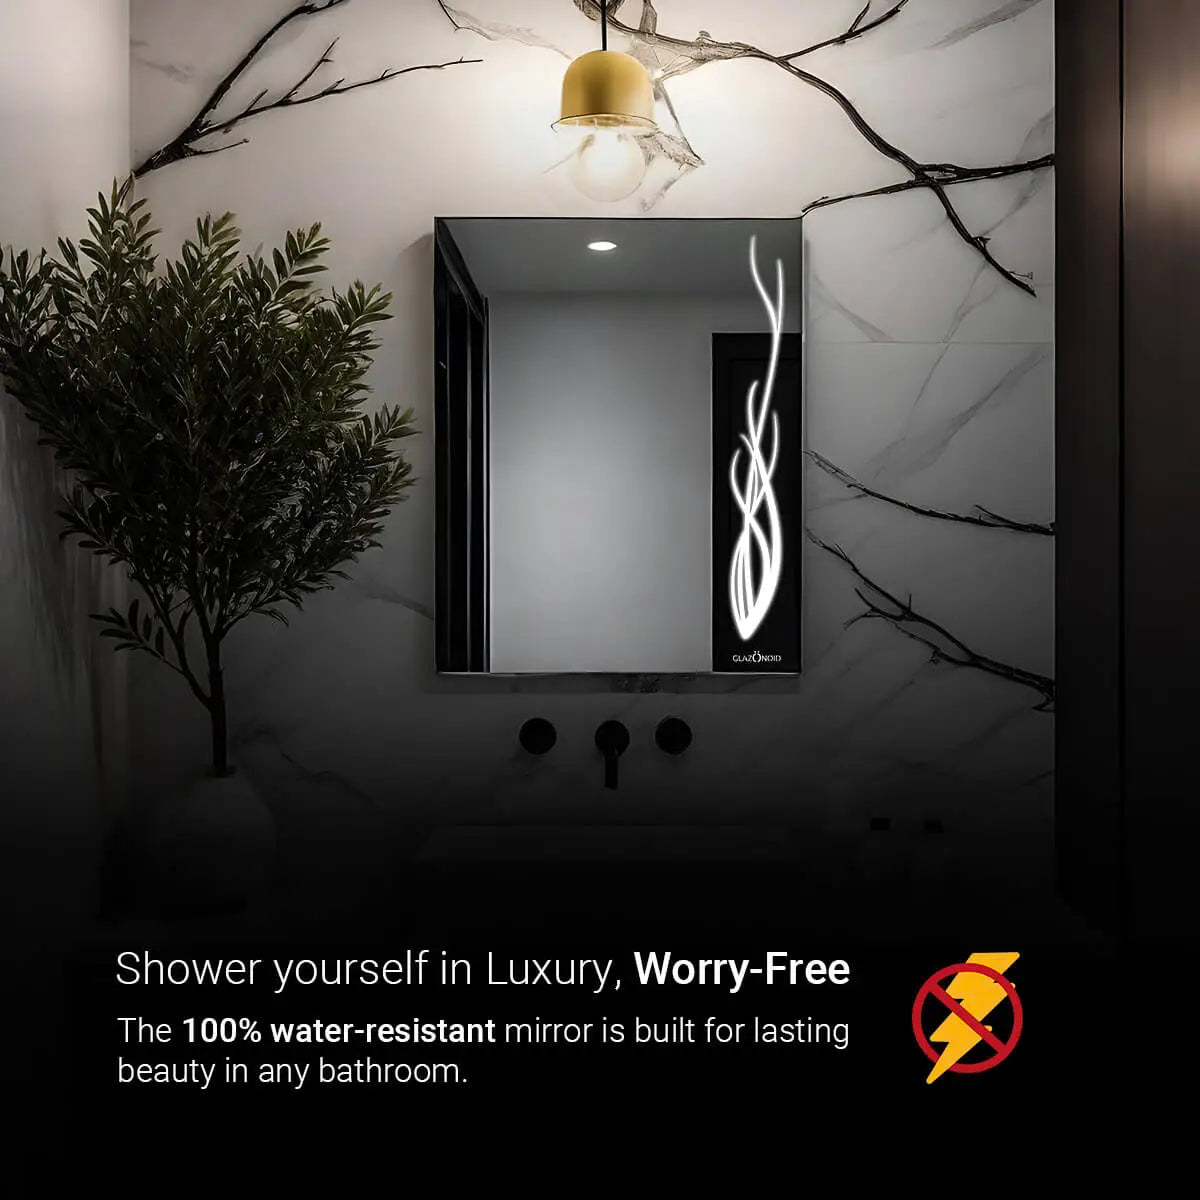 Modern bathroom LED mirror with a potted plant on a shelf. The mirror has a very bright white LED light. The text overlay describes that the mirror is shock proof and waterproof. 